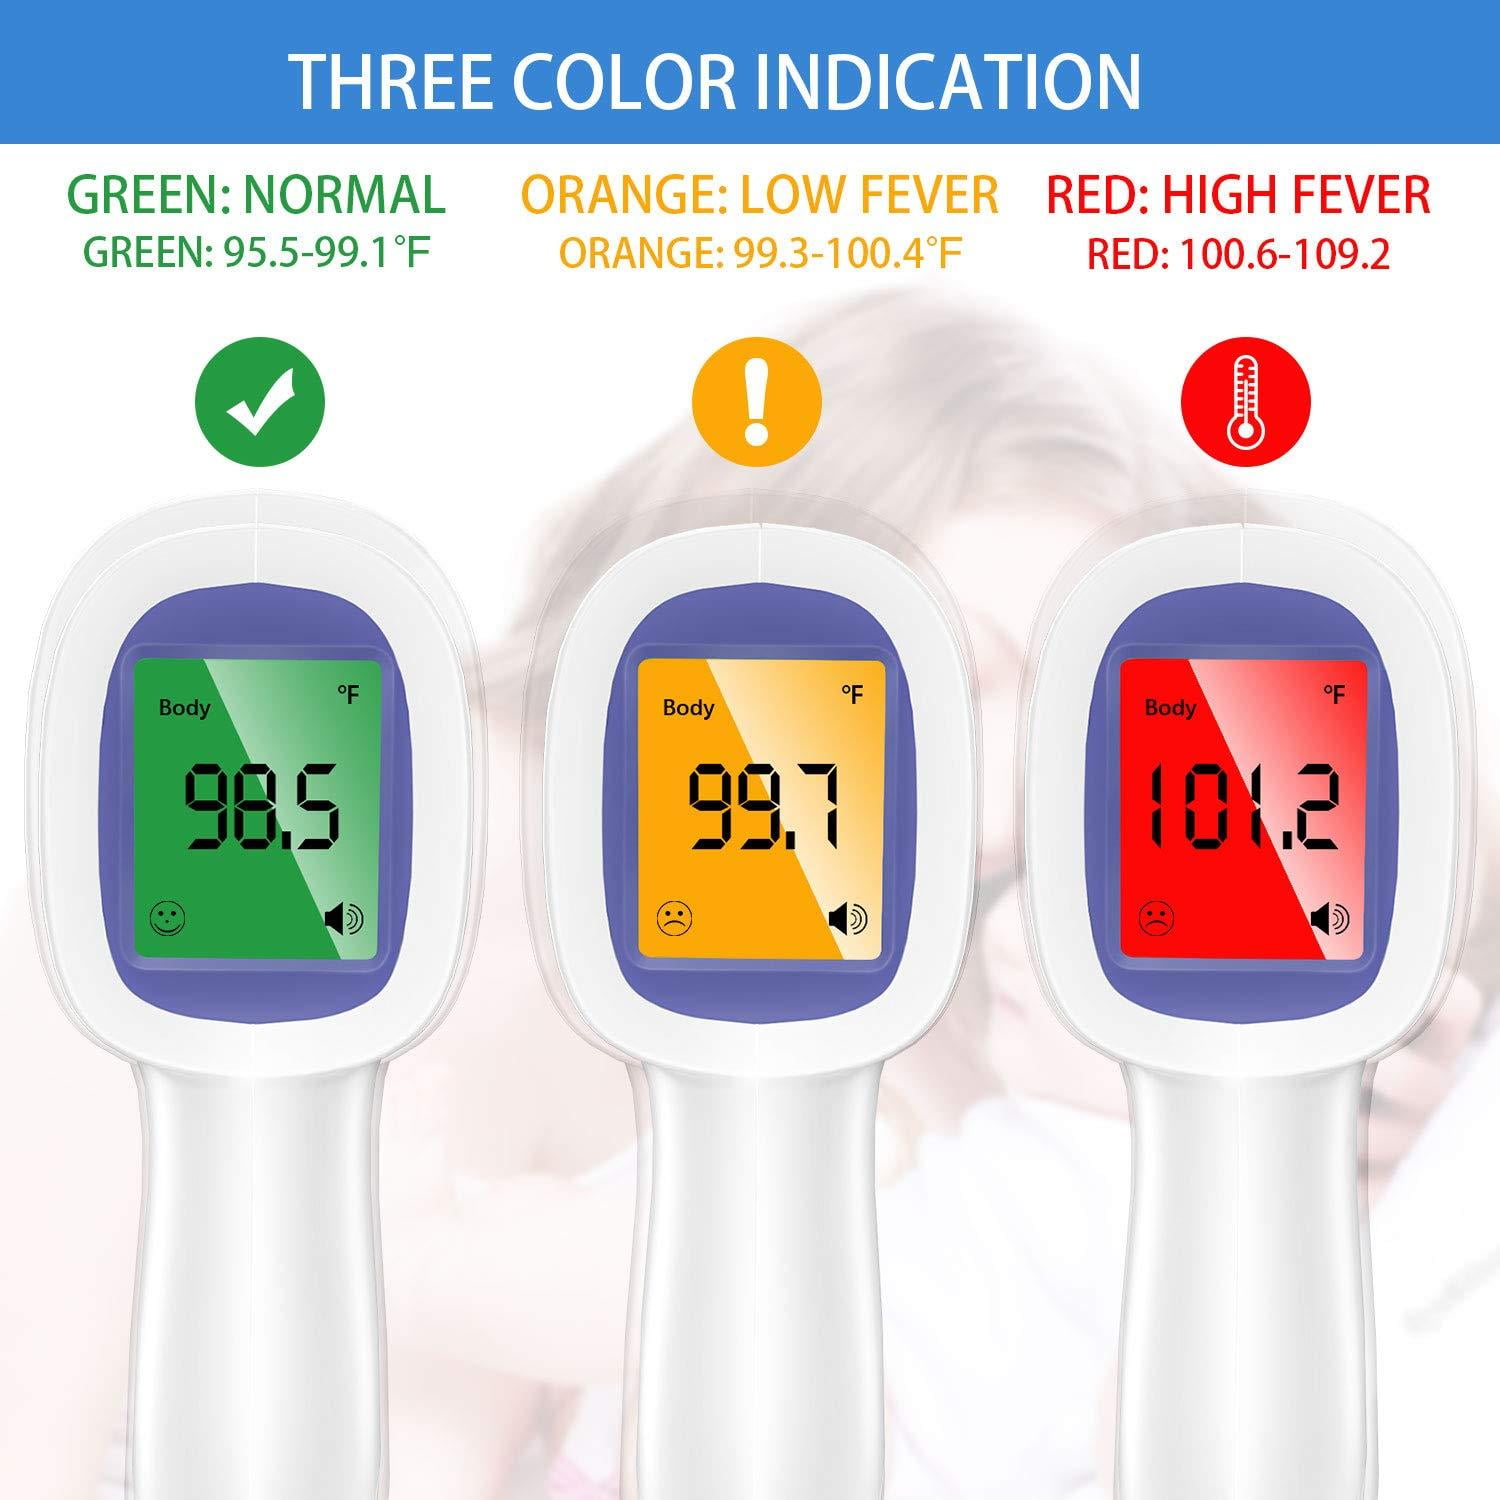 Save on CareOne Dual Mode Infrared Thermometer Order Online